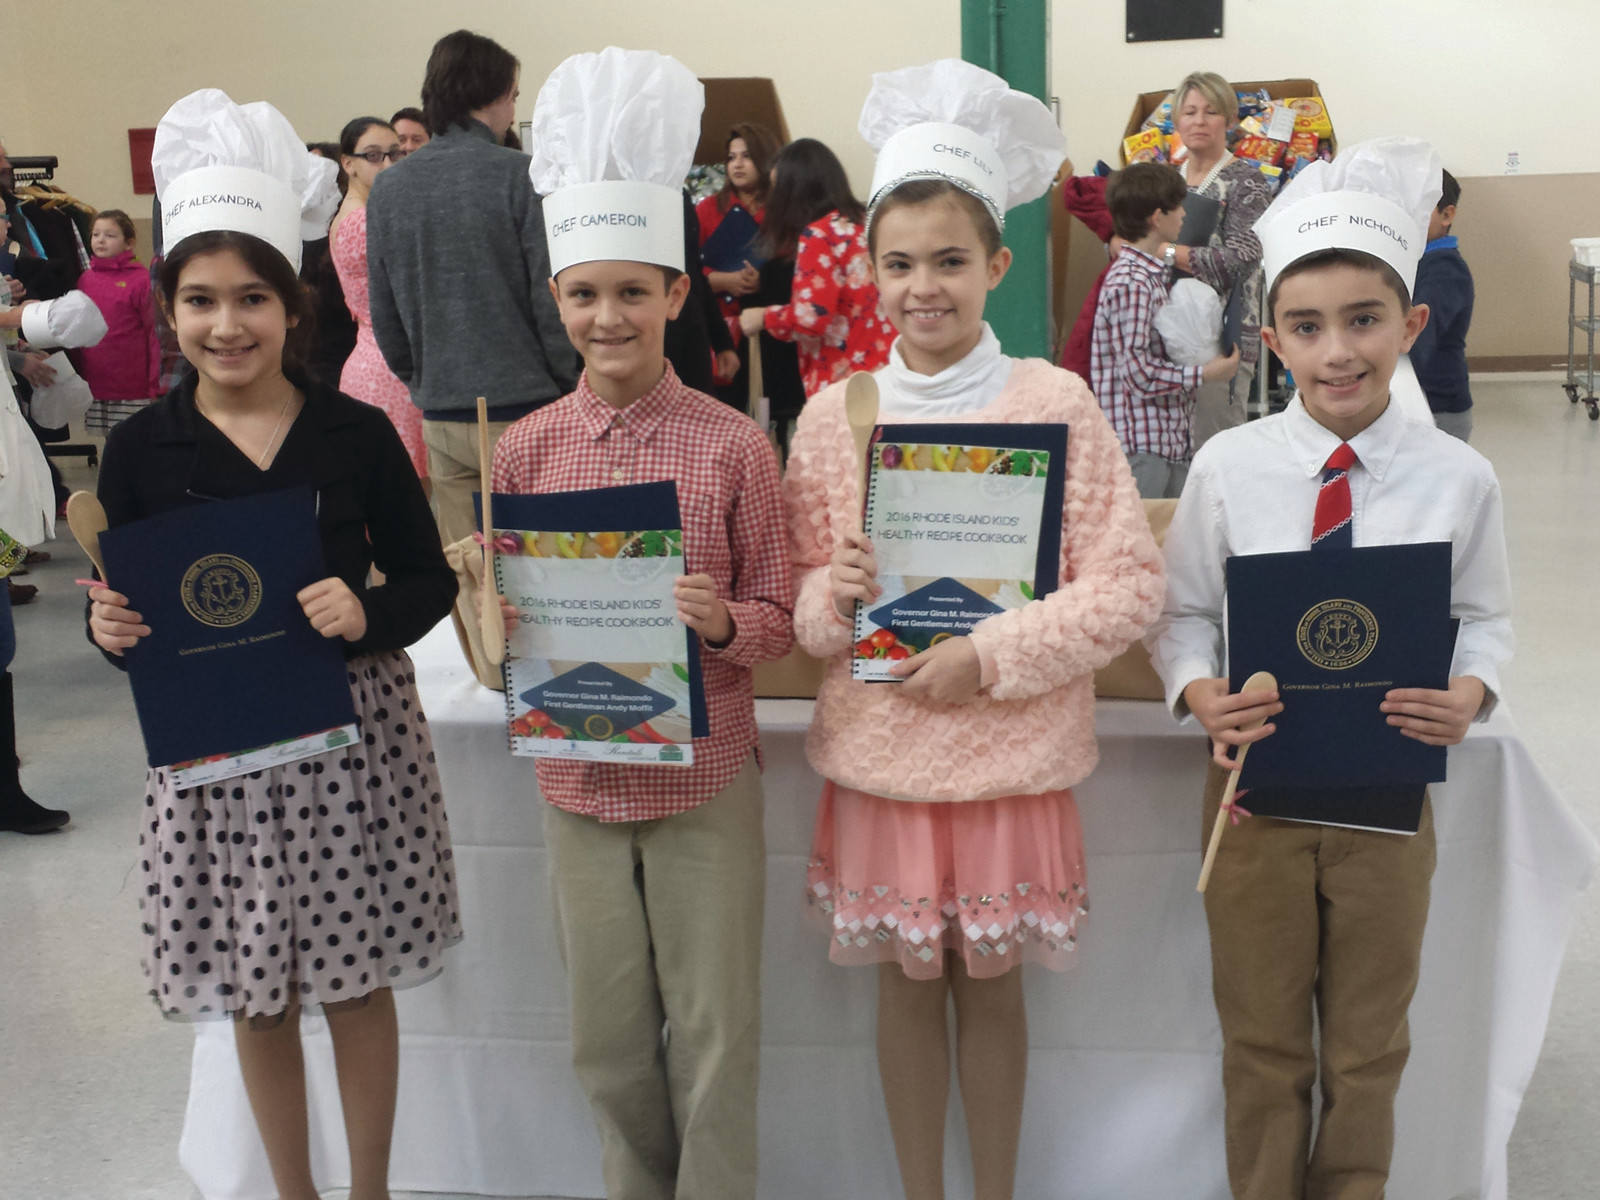 REPRESENTING THE CITY: The Cranston winners and finalists took a moment out of their celebration to pose together in their chefs hats with their cookbooks and citations. Pictured, from left, are fifth-graders Alexandra Cowart, Cameron Belisle, Lily Addonizio, and Nicholas Soccio.